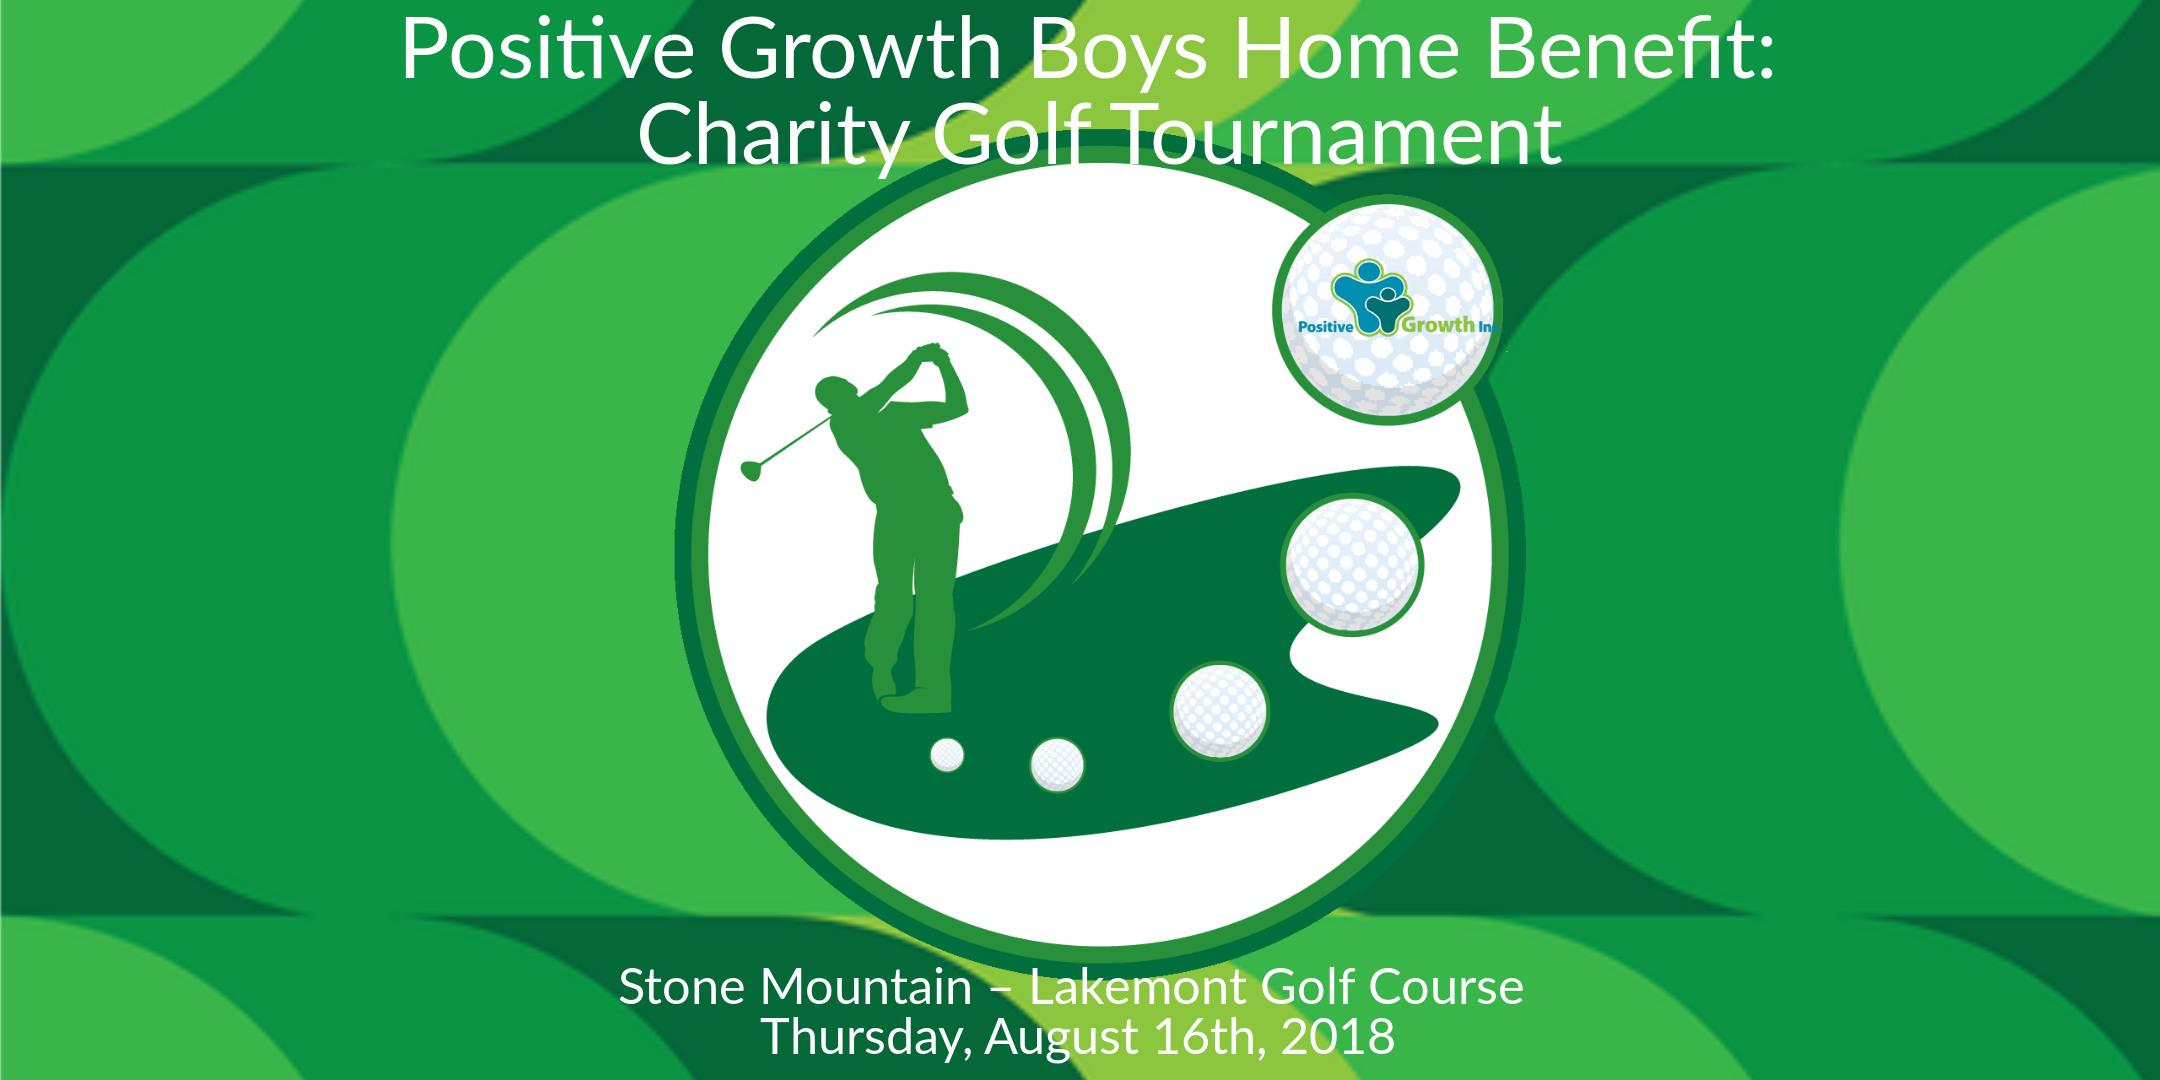 Positive Growth Boys Home Benefit: Charity Golf Tournament